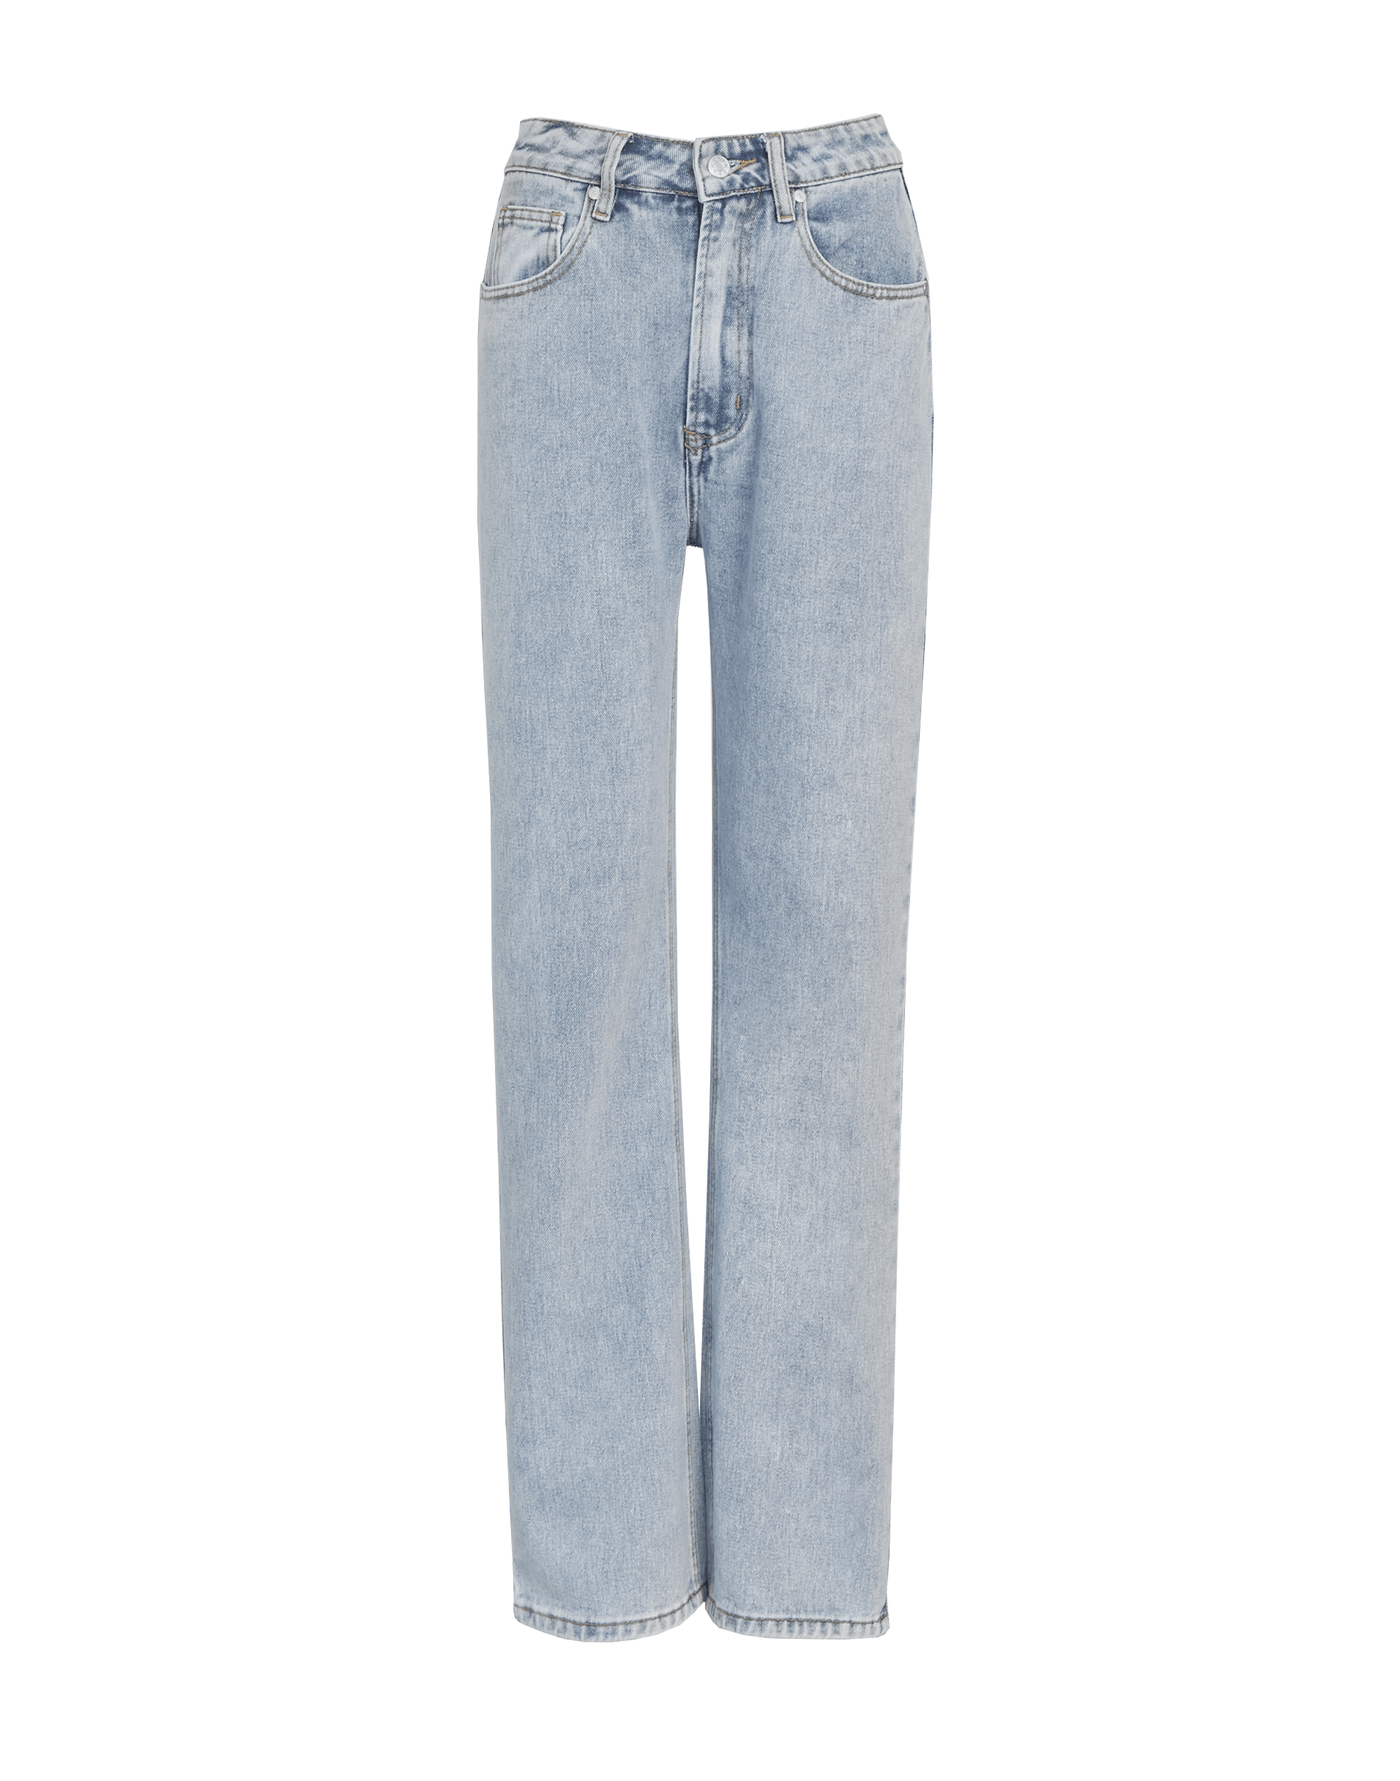 Cooper Straight Leg Jeans (Vintage) - High Waisted Jeans - Women's Pants - Charcoal Clothing